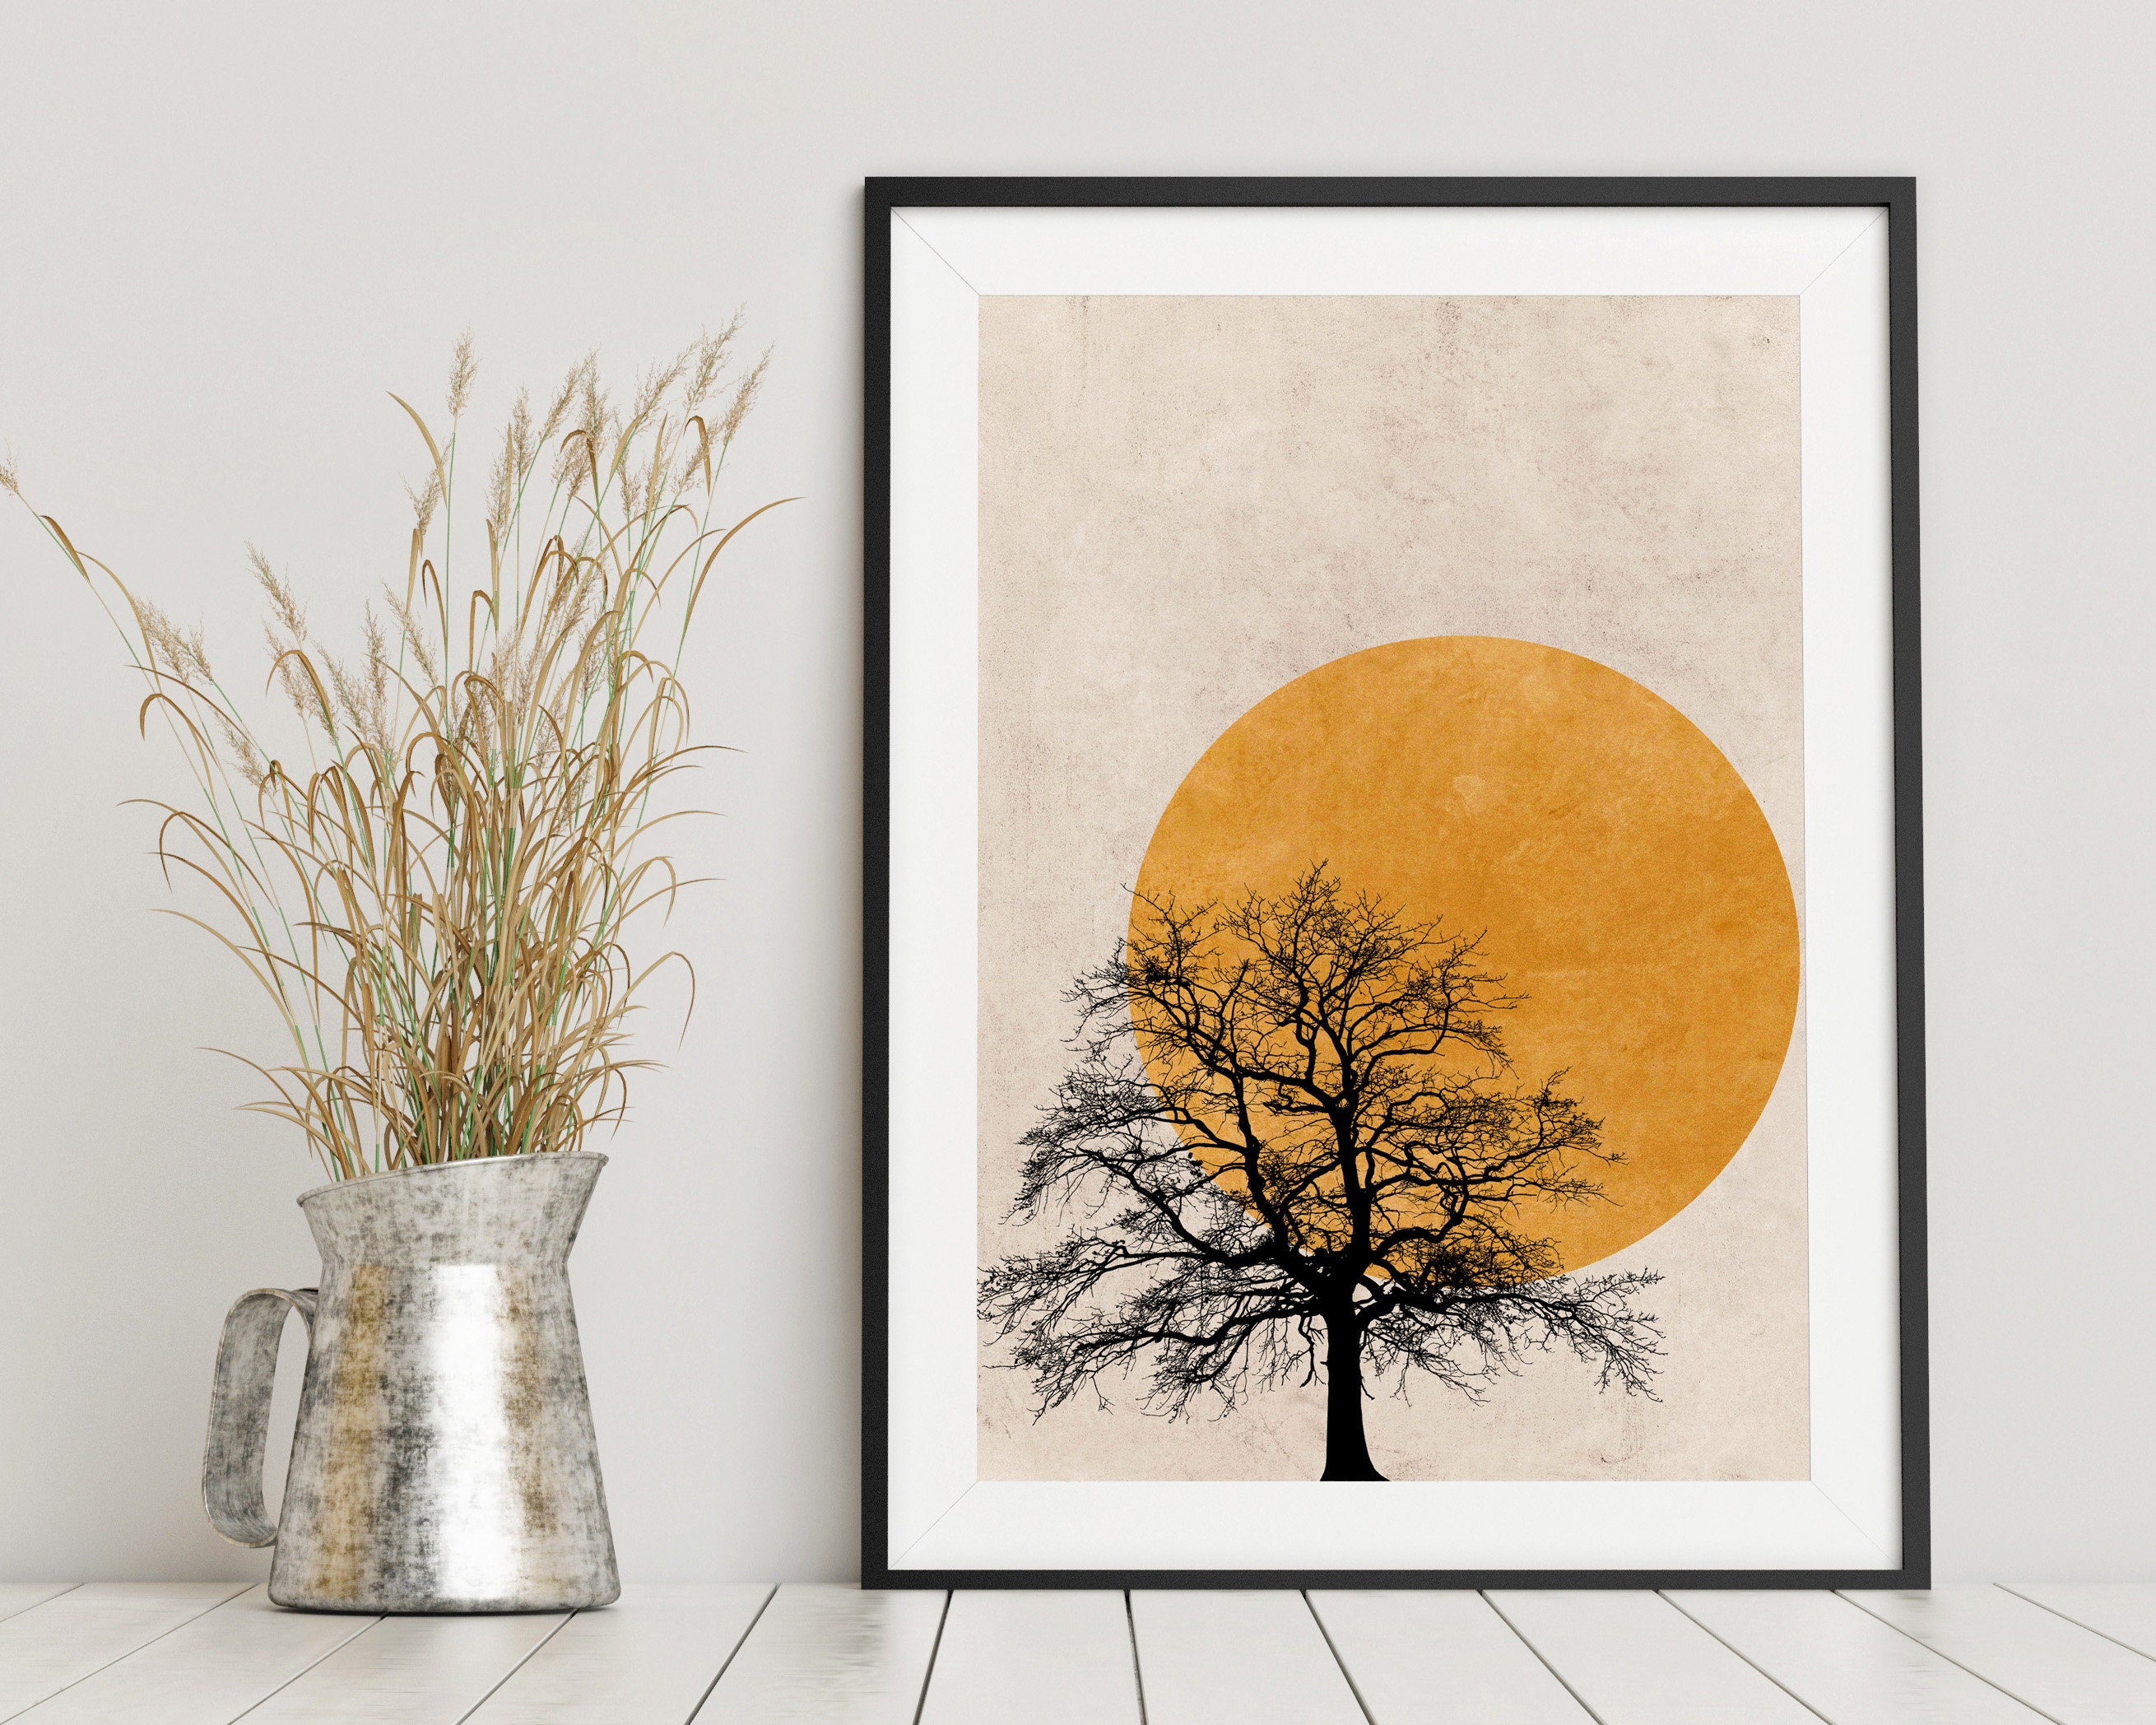 SUNRISE BACKLIGHT SILHOUETTE TREES PHOTO ART PRINT POSTER PICTURE BMP948A